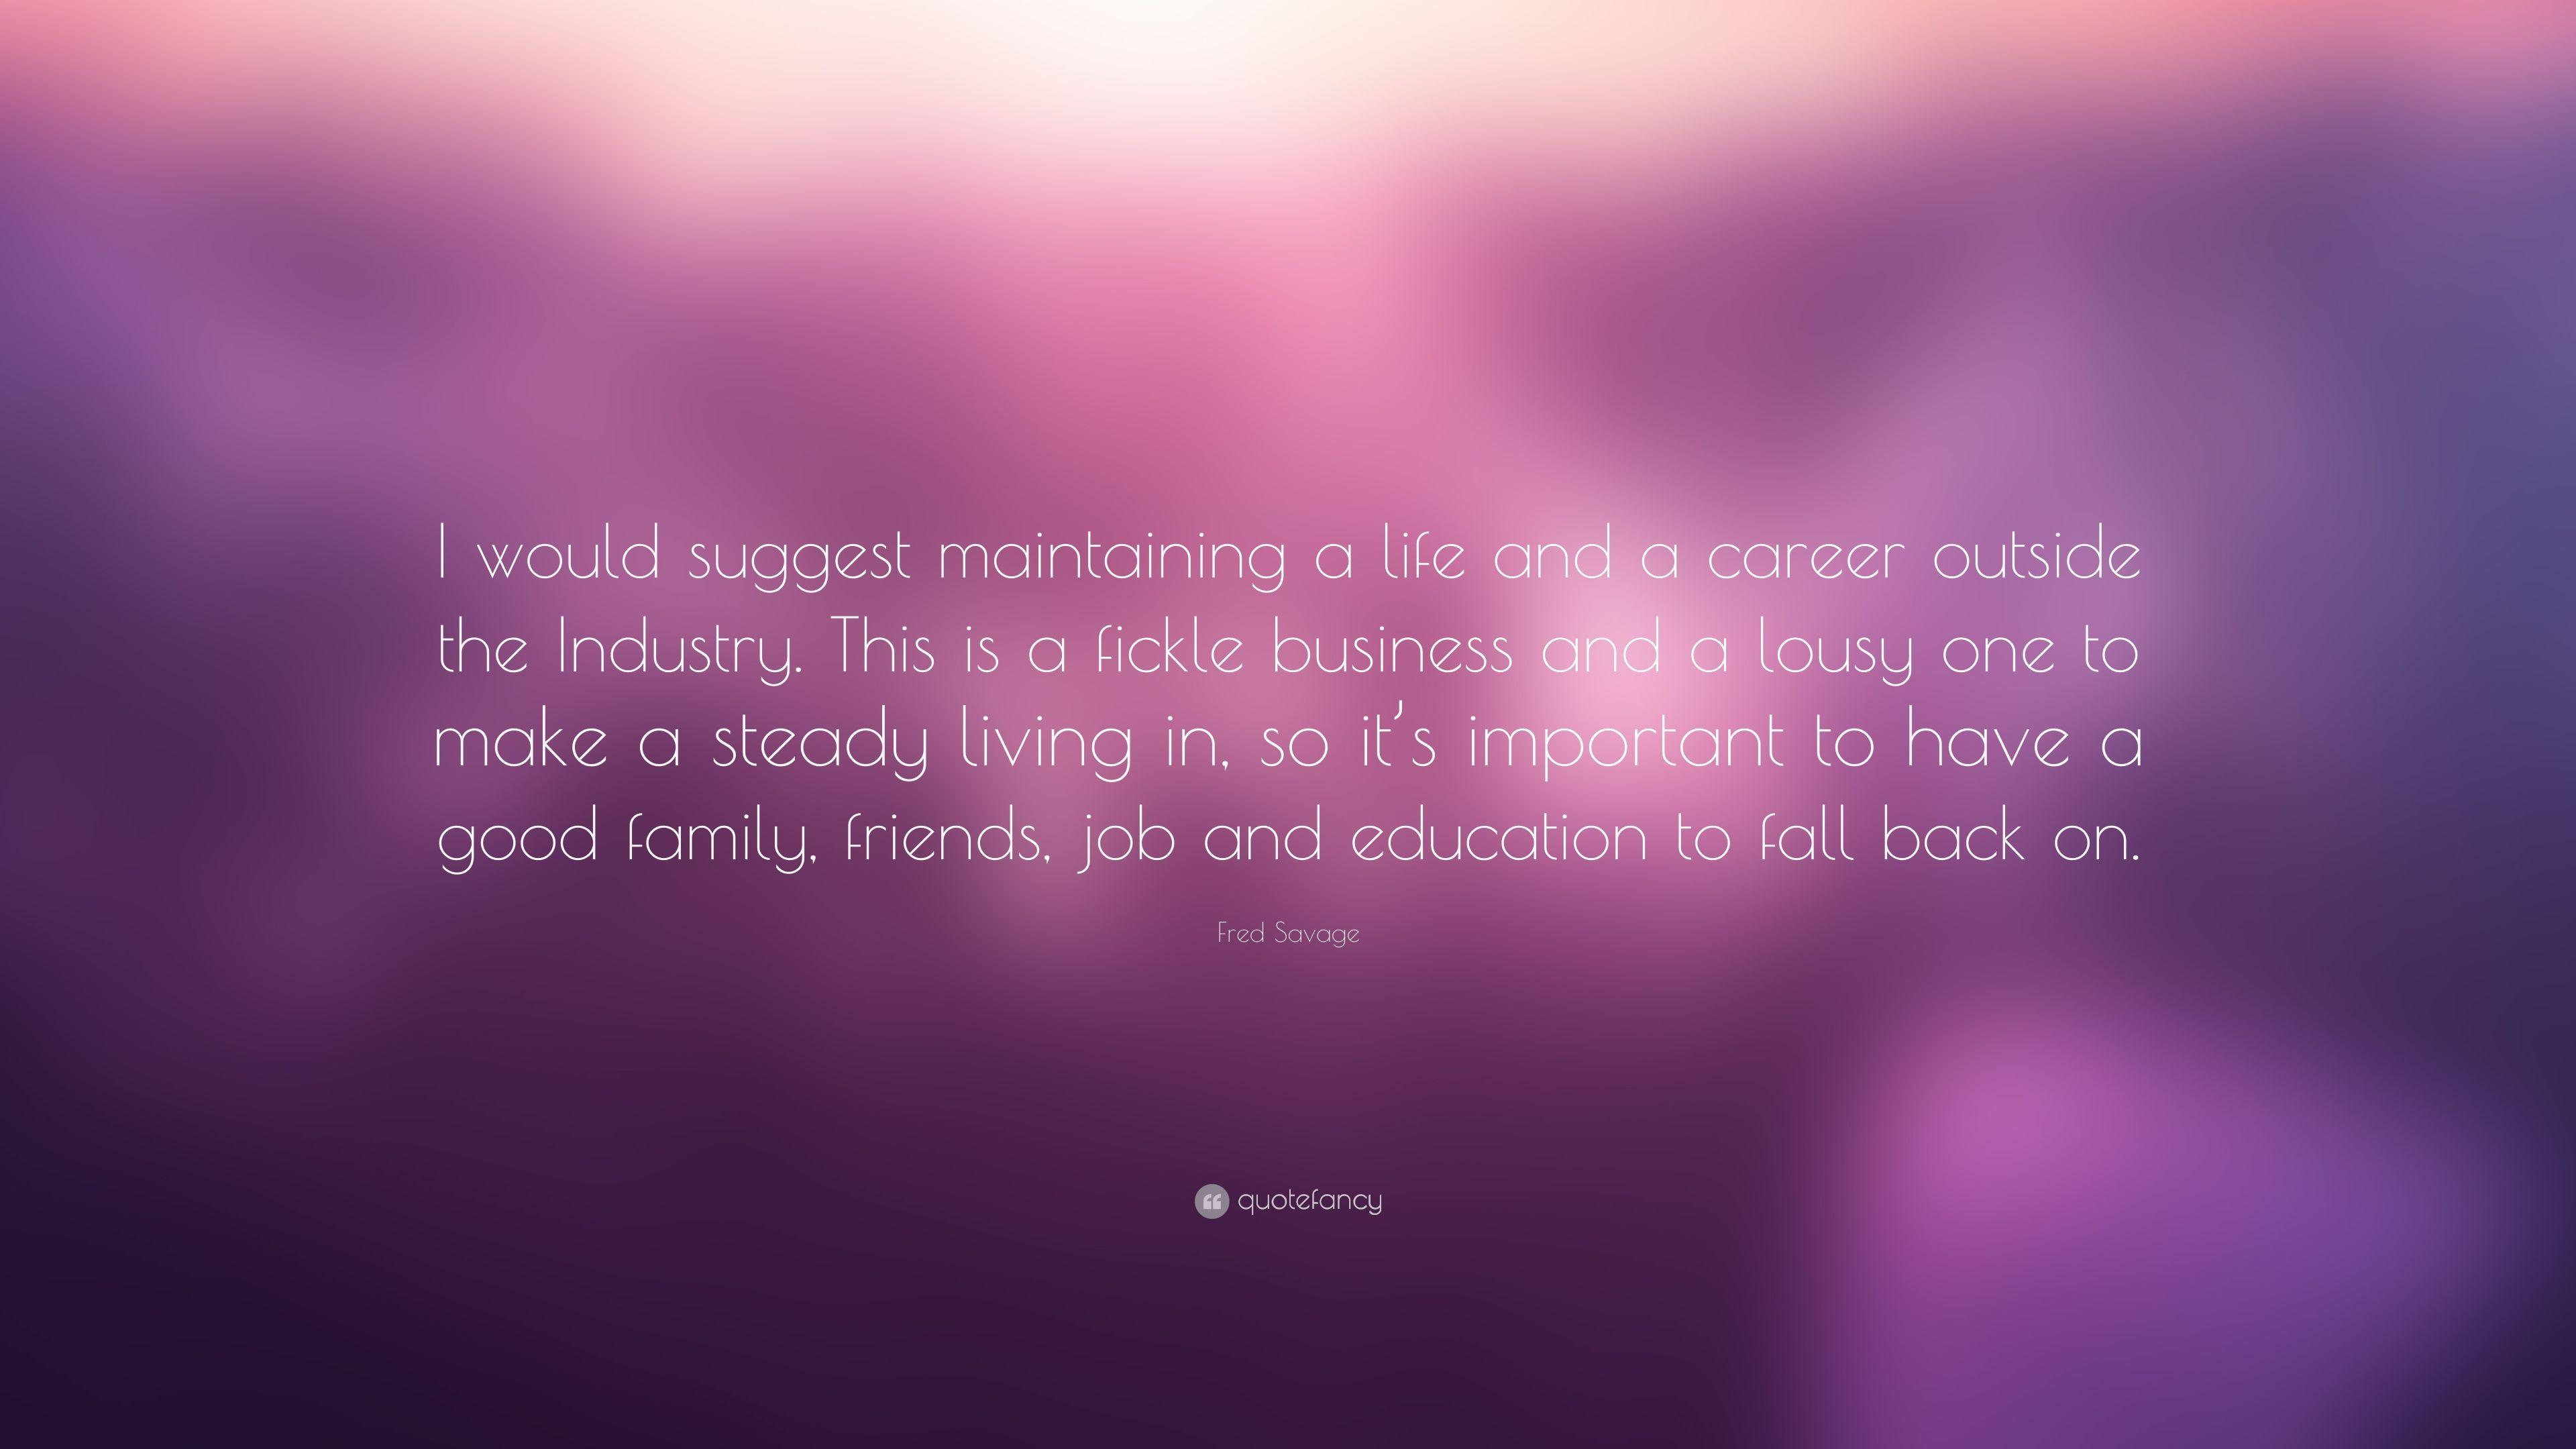 Fred Savage Quote: “I would suggest maintaining a life and a